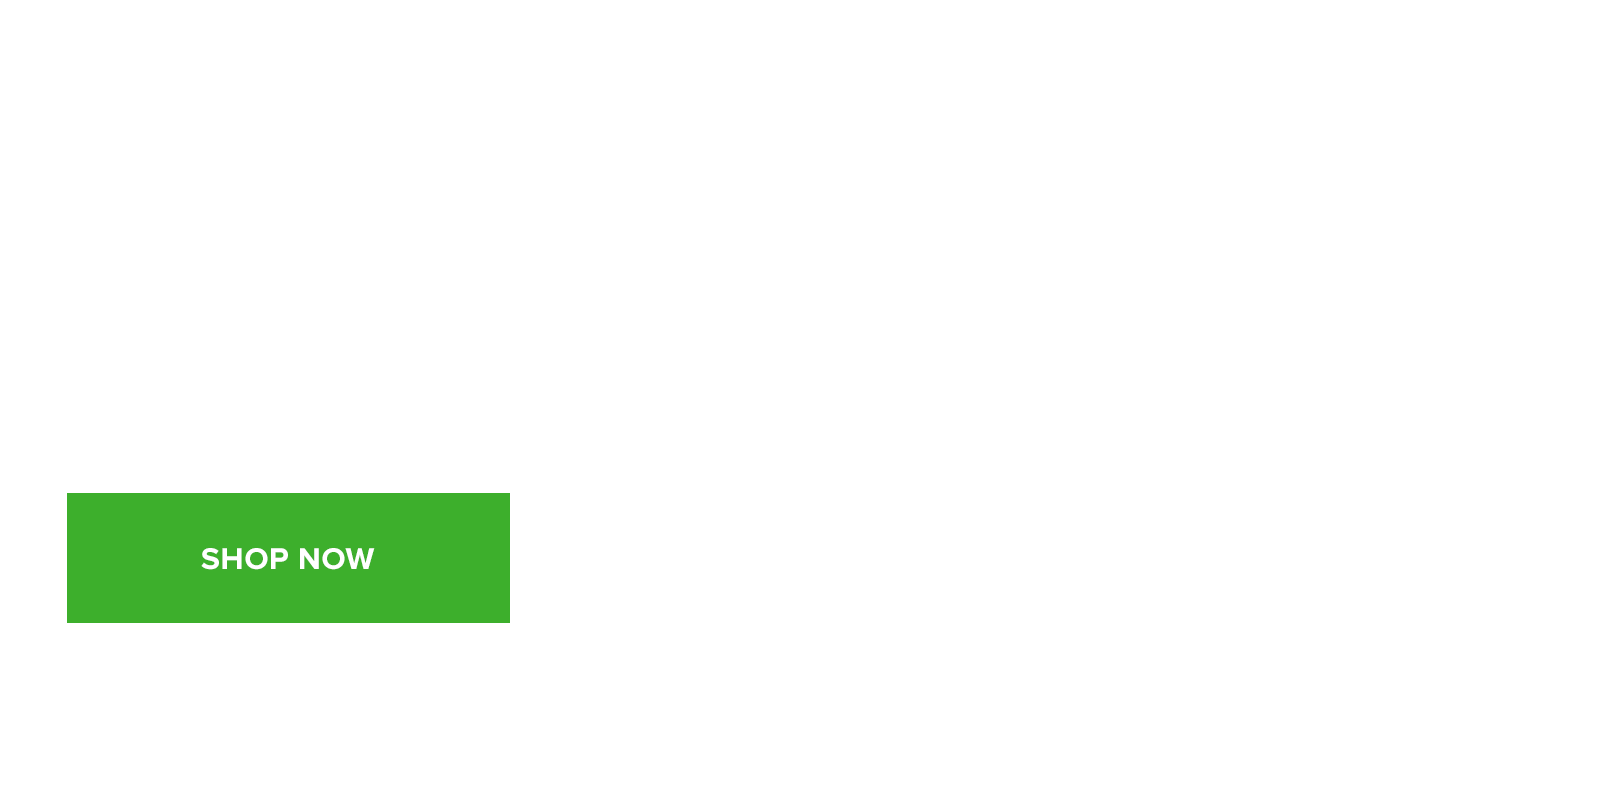 22% off active sitting with code active22